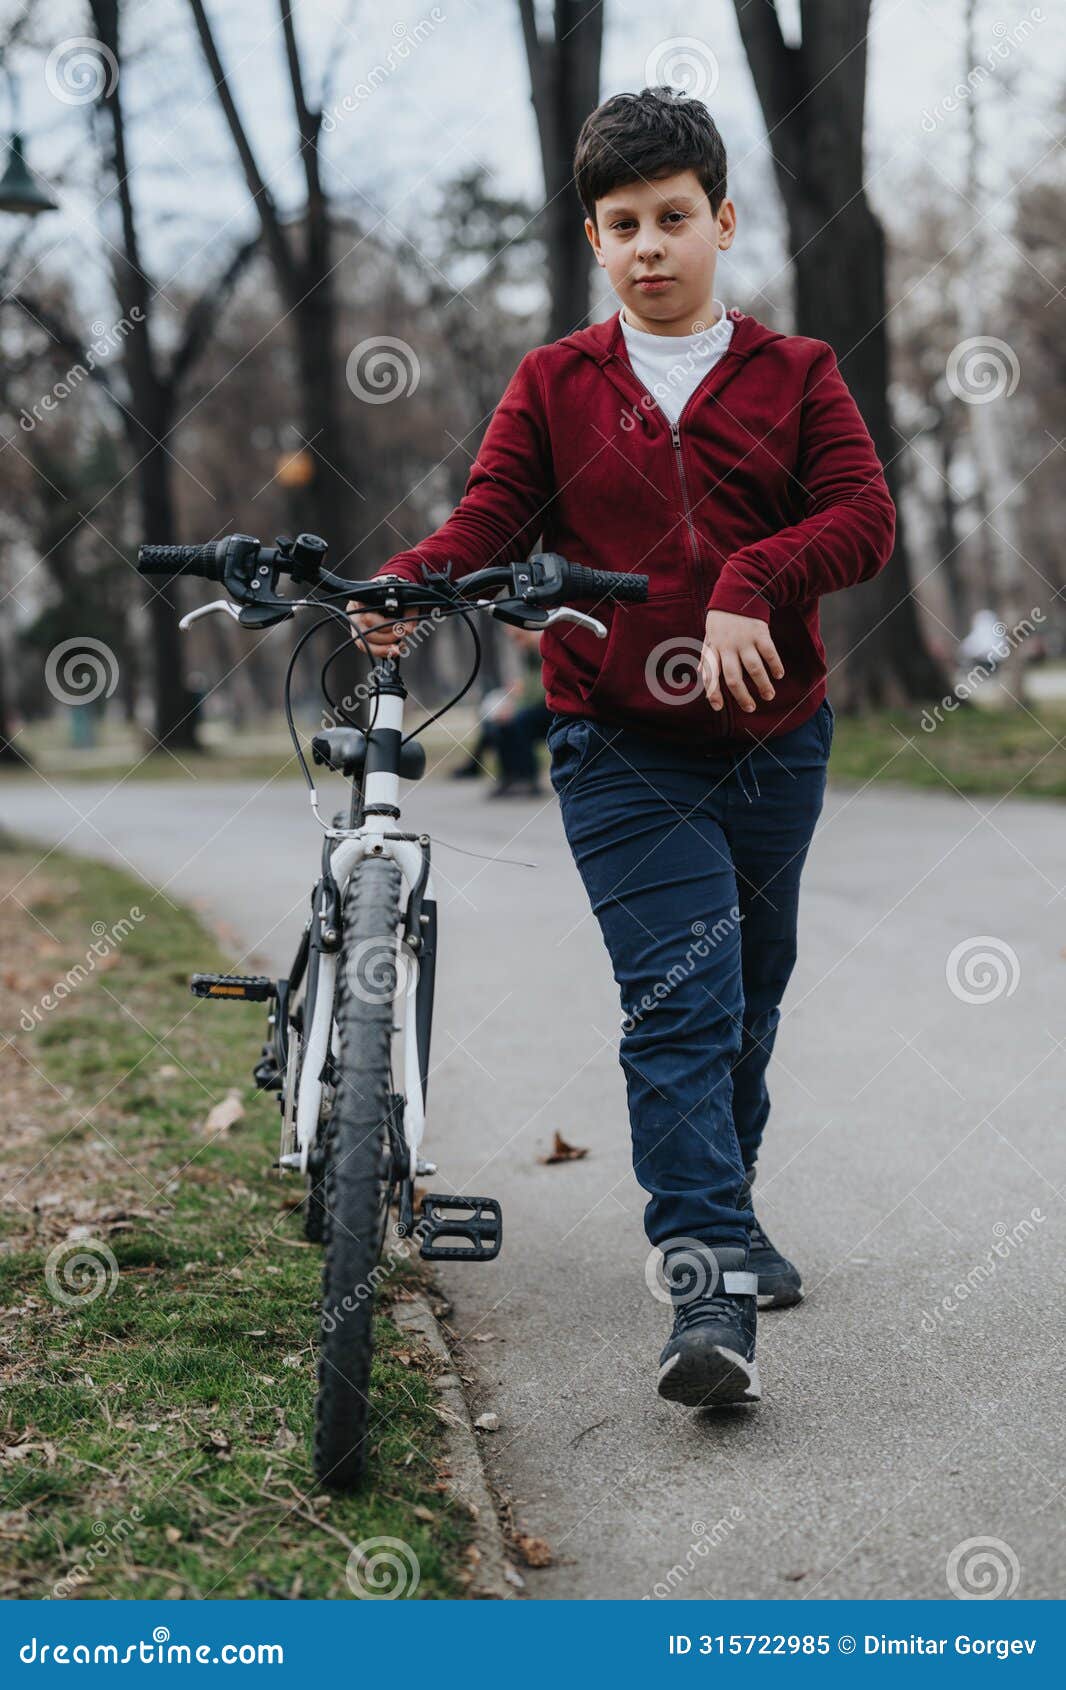 young boy walking with his bicycle in the park, enjoying an active day outdoors